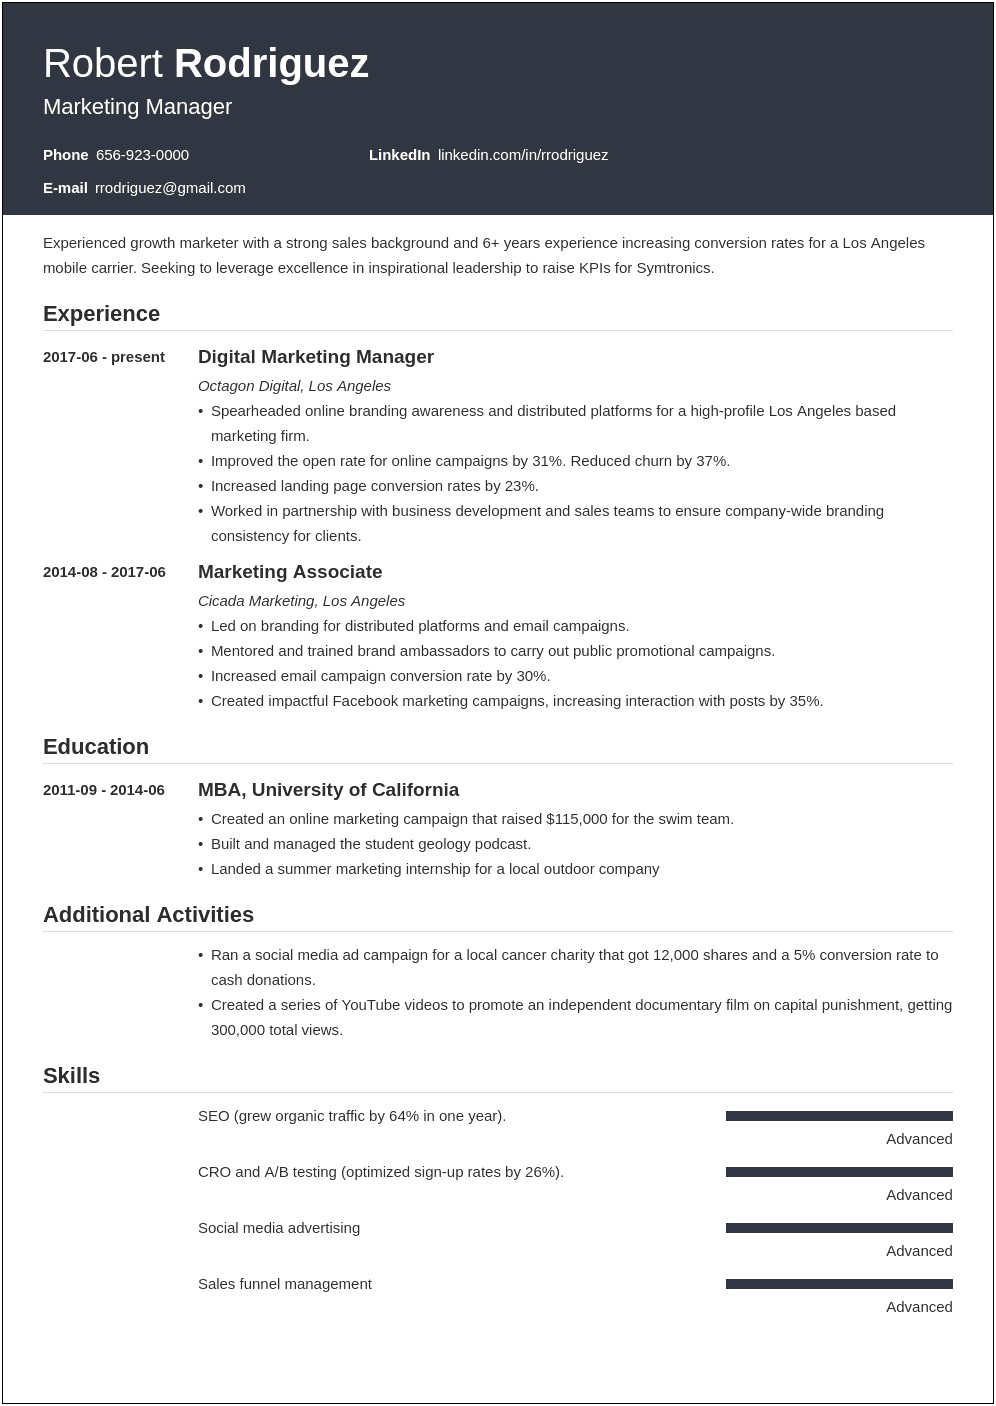 Free Online Career Profile With Resume